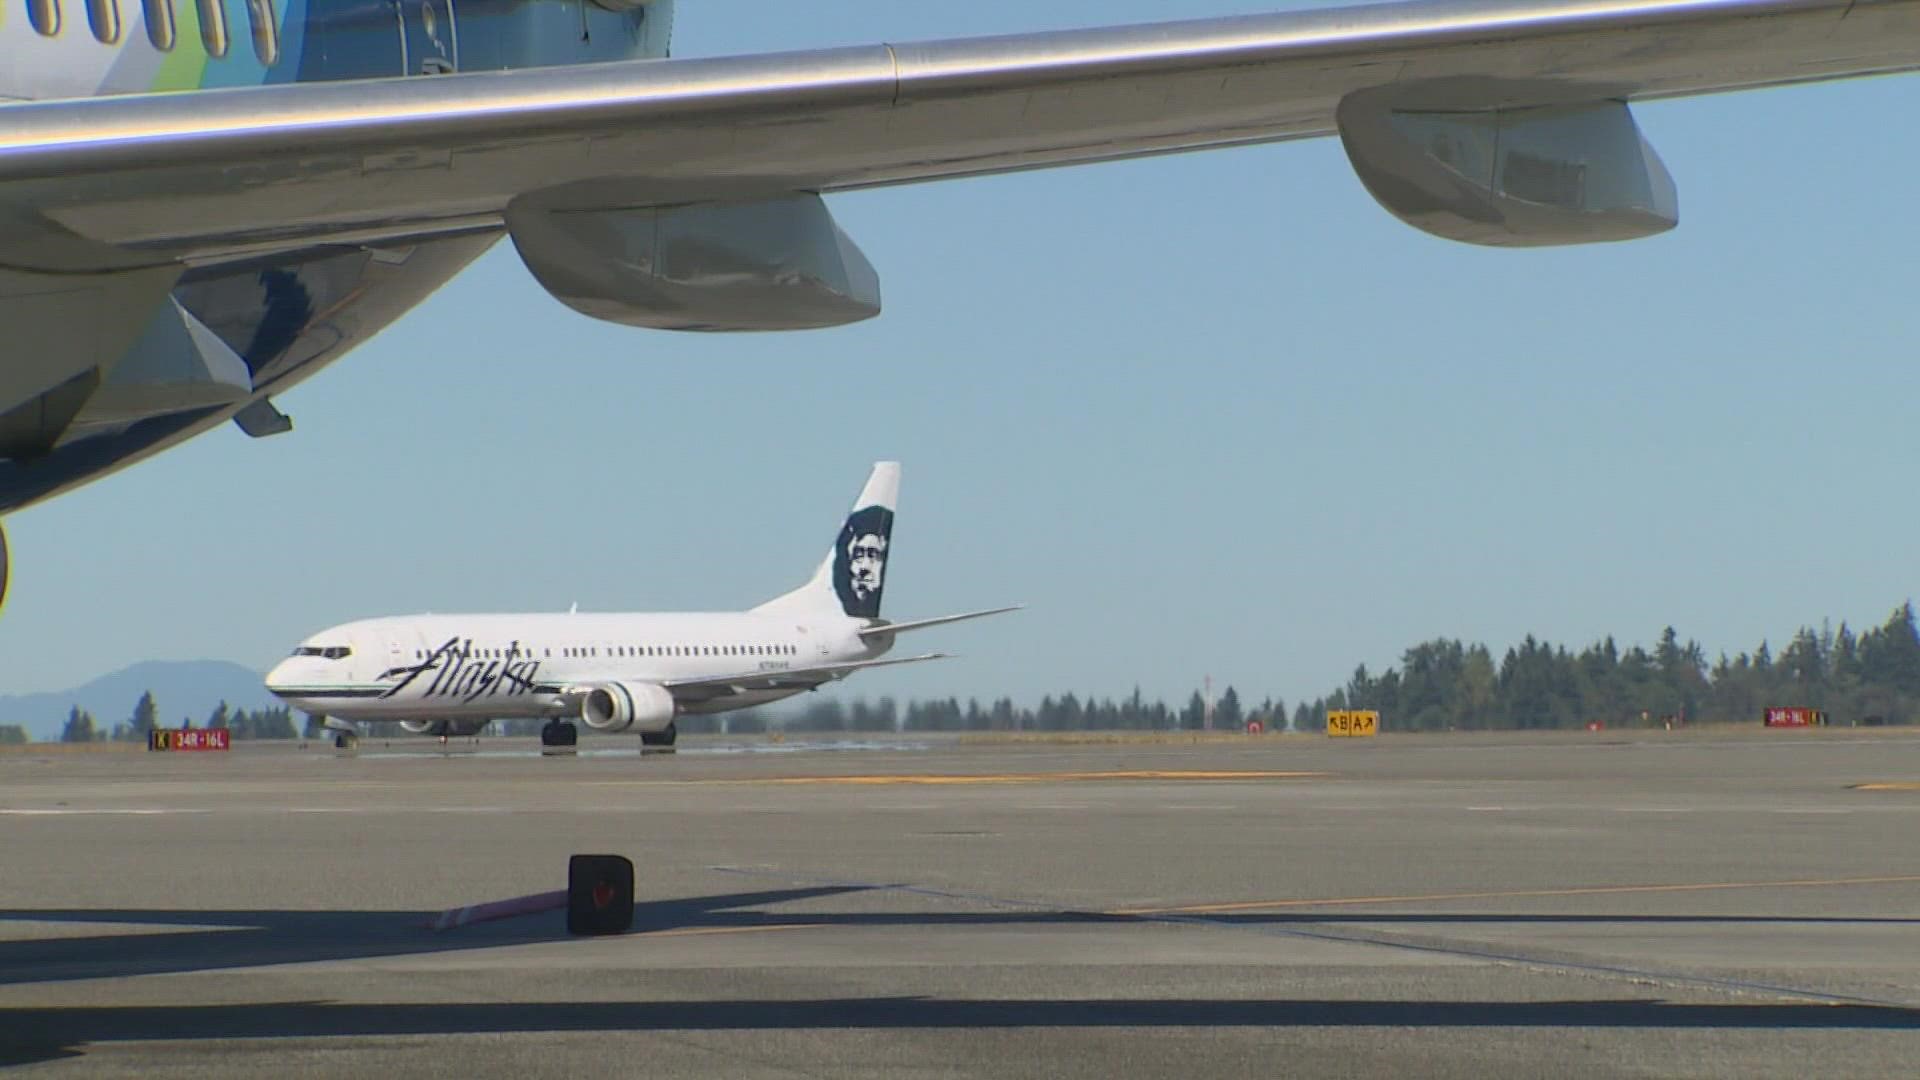 Three airlines are requiring workers to be vaccinated or undergo regular testing. Alaska Airlines could join them.